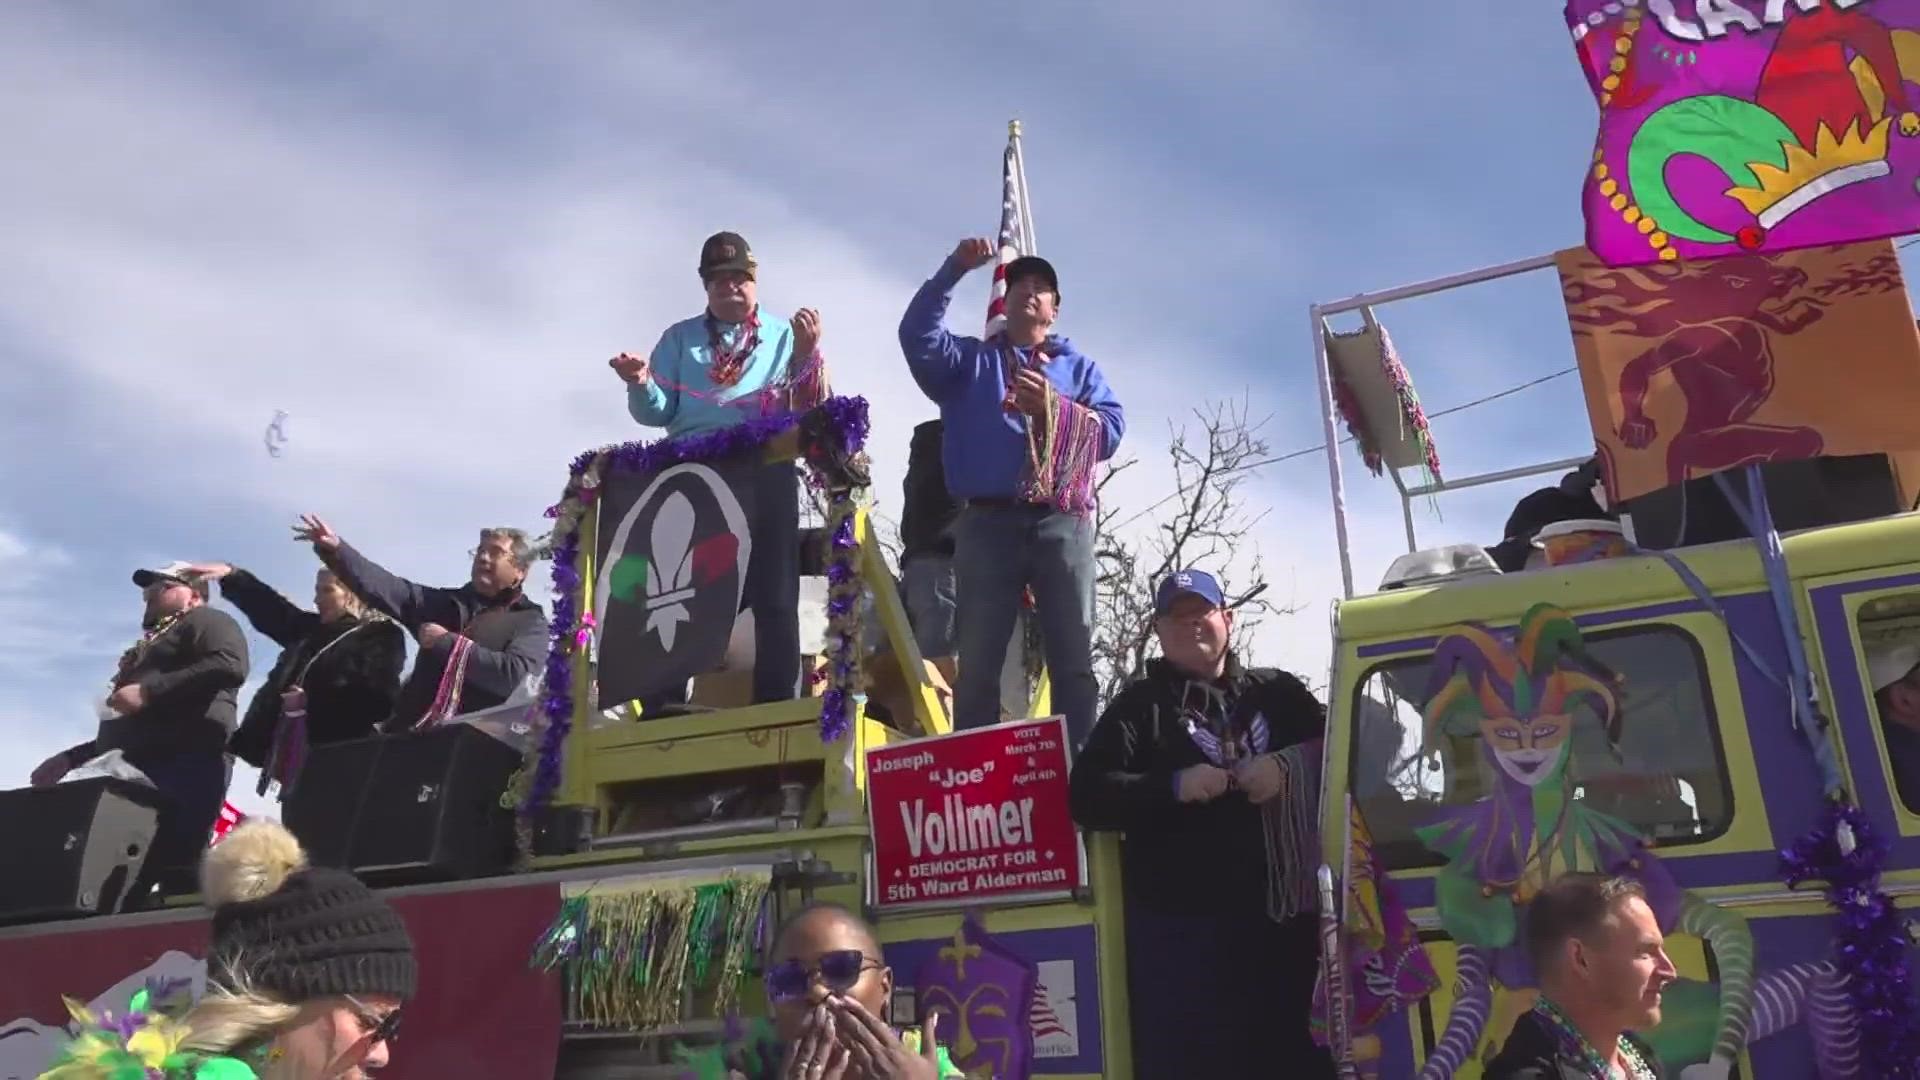 It's the 44th year Soulard hosted Mardi Gras celebrations. This year's parade theme was "That's Entertainment."